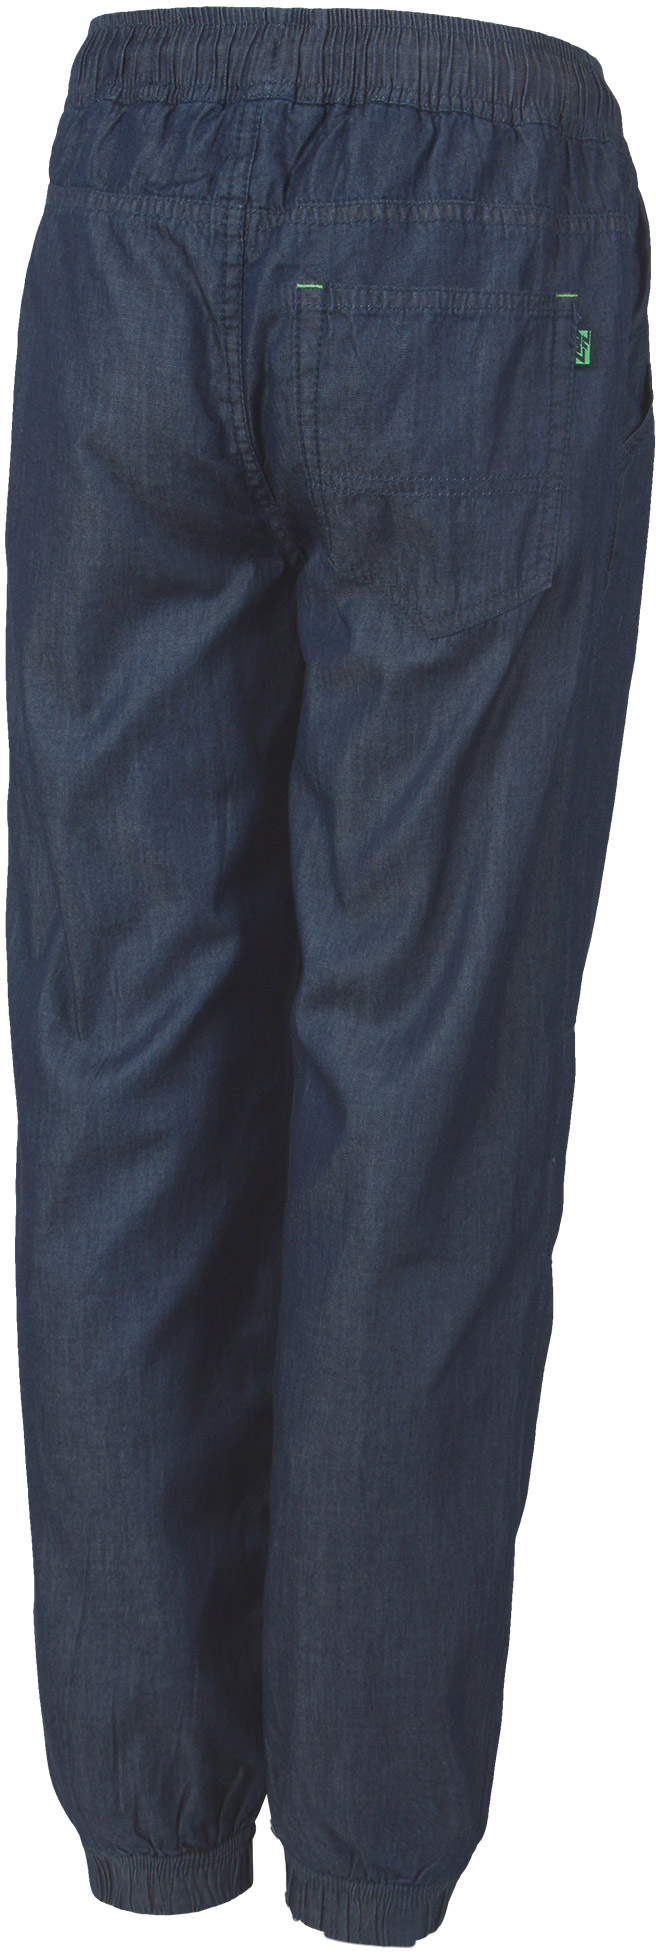 Boys’ insulated pants